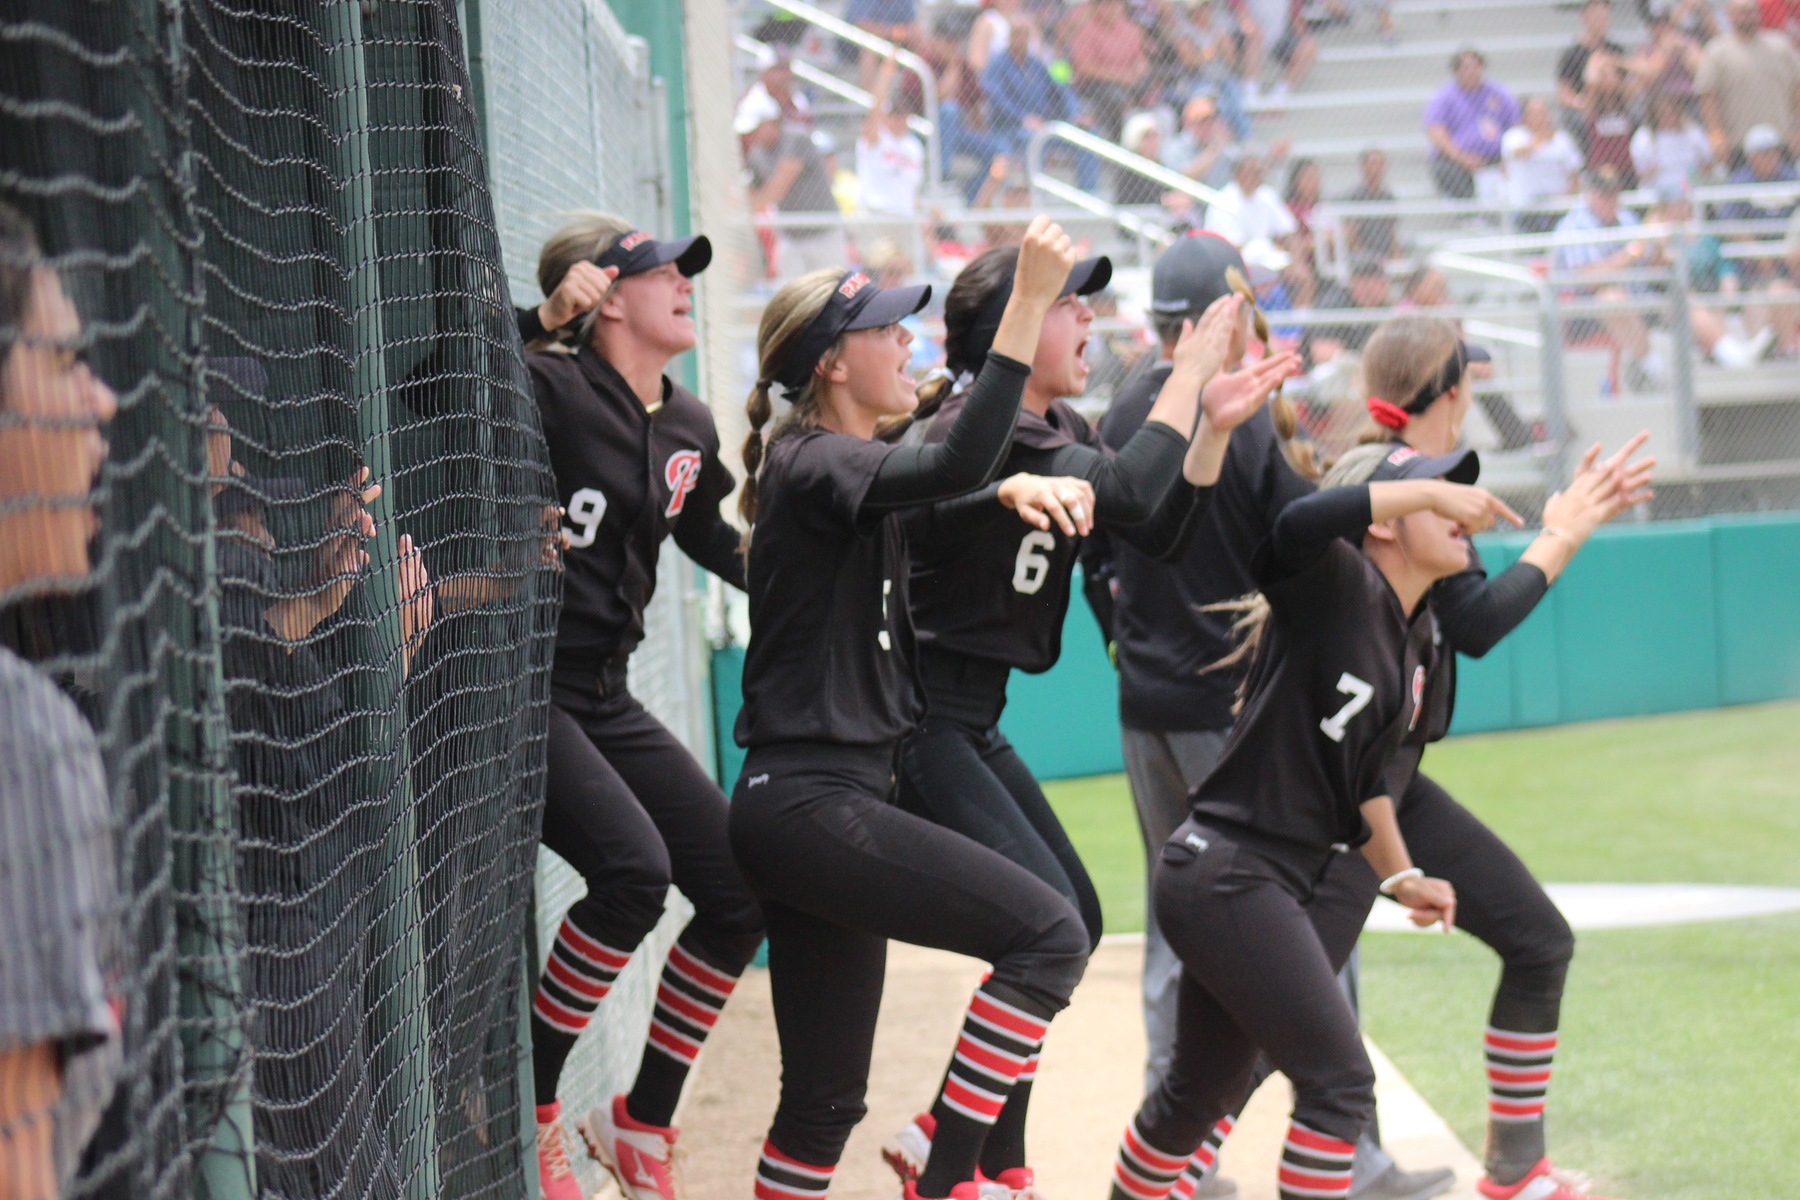 The team cheers as Kendall Kates' RBI single tied the game against Mt. SAC.